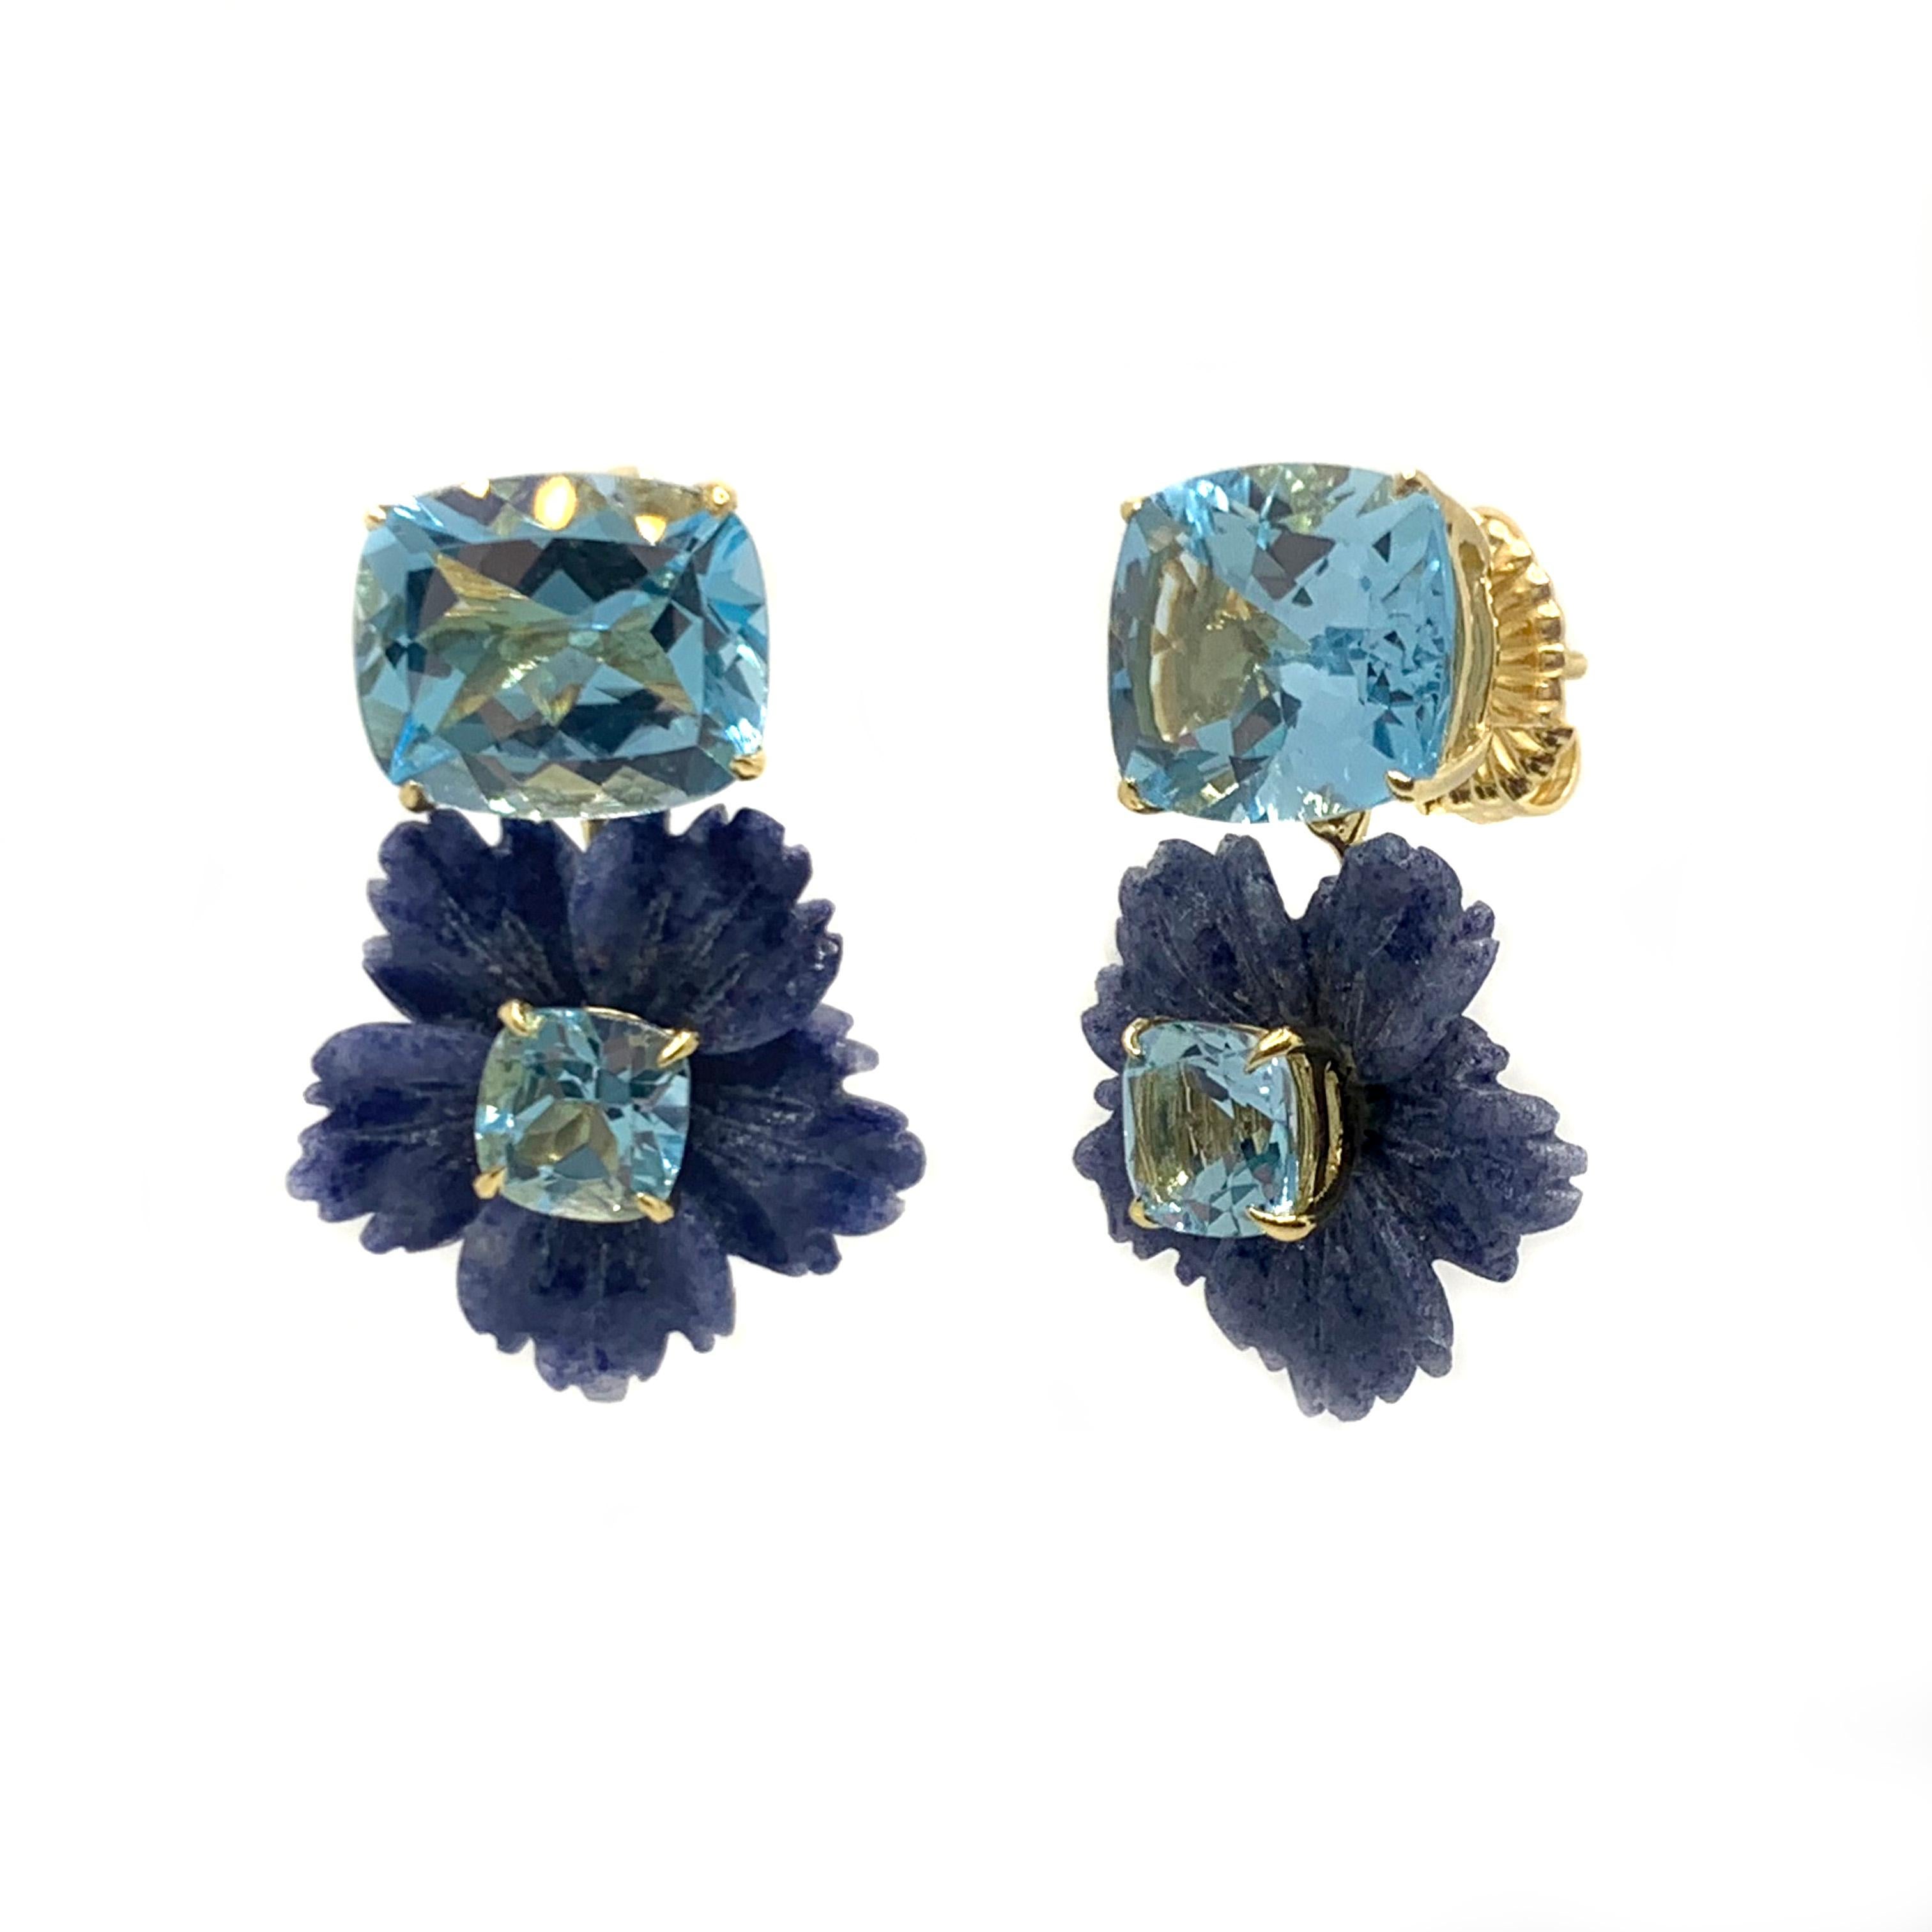 Mixed Cut Stunning Cushion-cut Blue Topaz and Carved Dumortierite Flower Drop Earrings